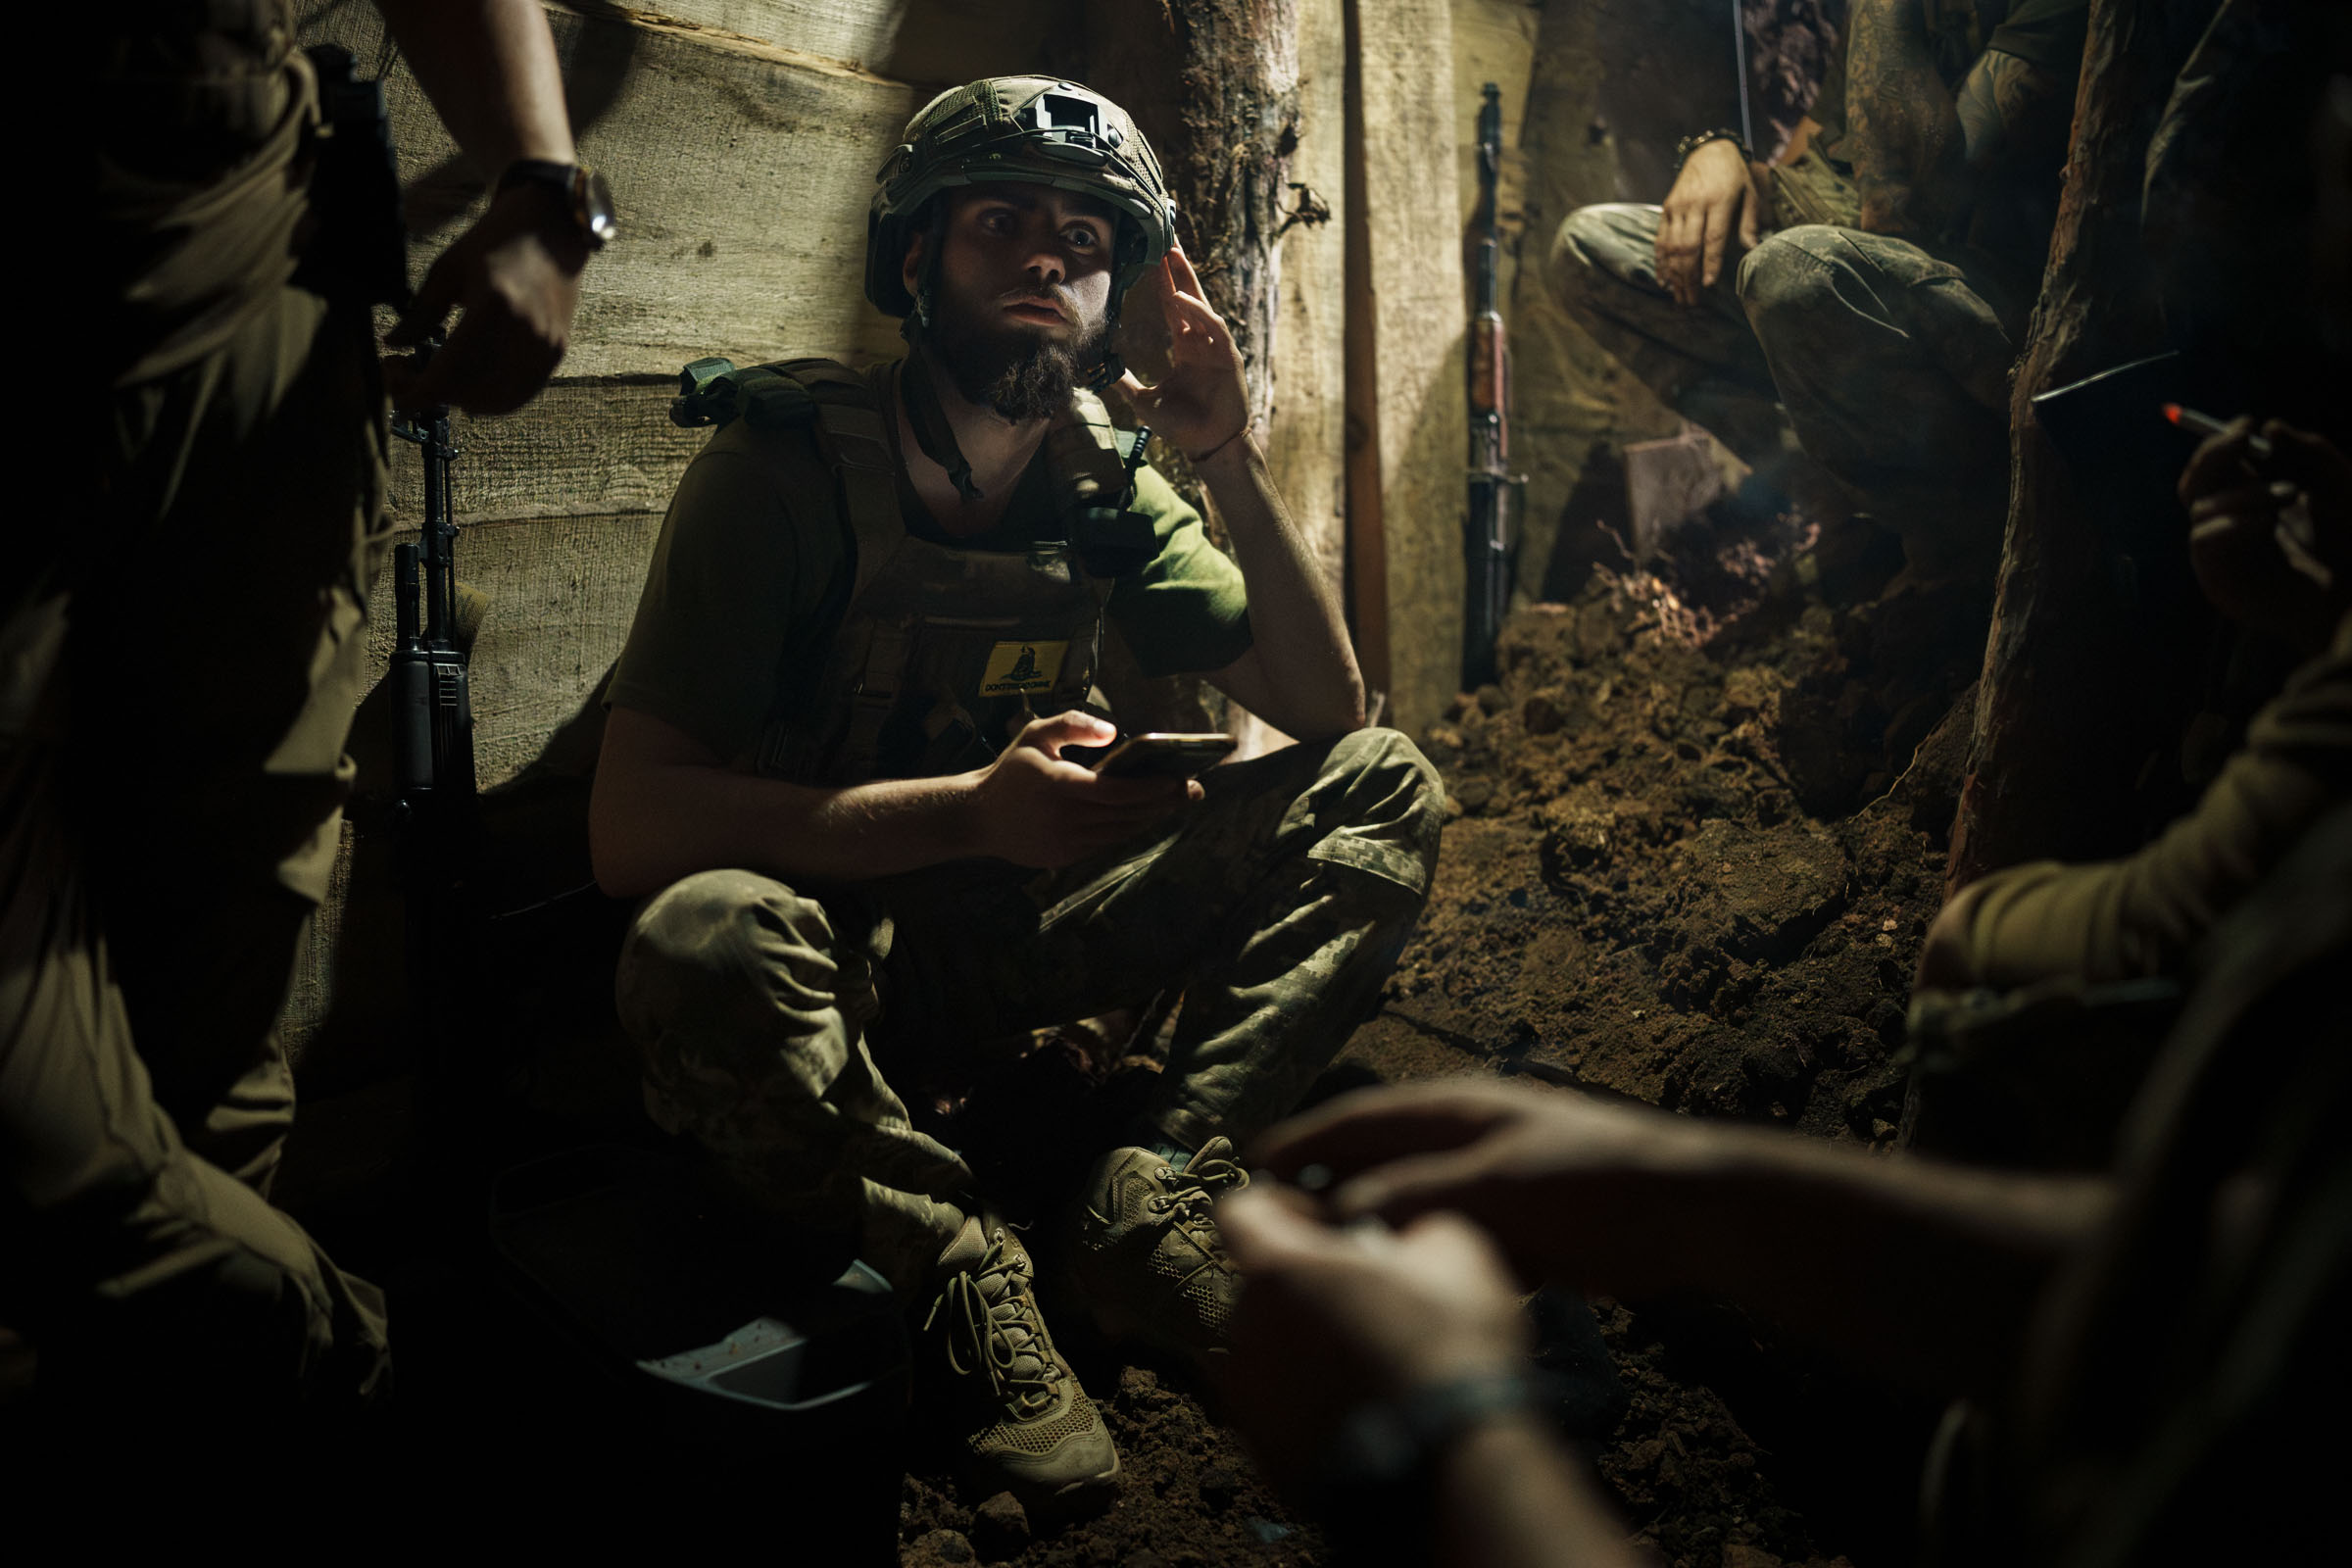 Ukrainian soldiers of 3rd Separate Assault Brigade hide in a dugout during the shelling of Russian tanks and guns on the Bakhmut direction on July 1, 2023 in Donetsk Oblast, Ukraine. Bakhmut and its surroundings continue to be places of most fierce battles since the beginning of the full-scale Russian invasion. (Serhii Mykhalchuk—Global Images Ukraine/Getty Images)